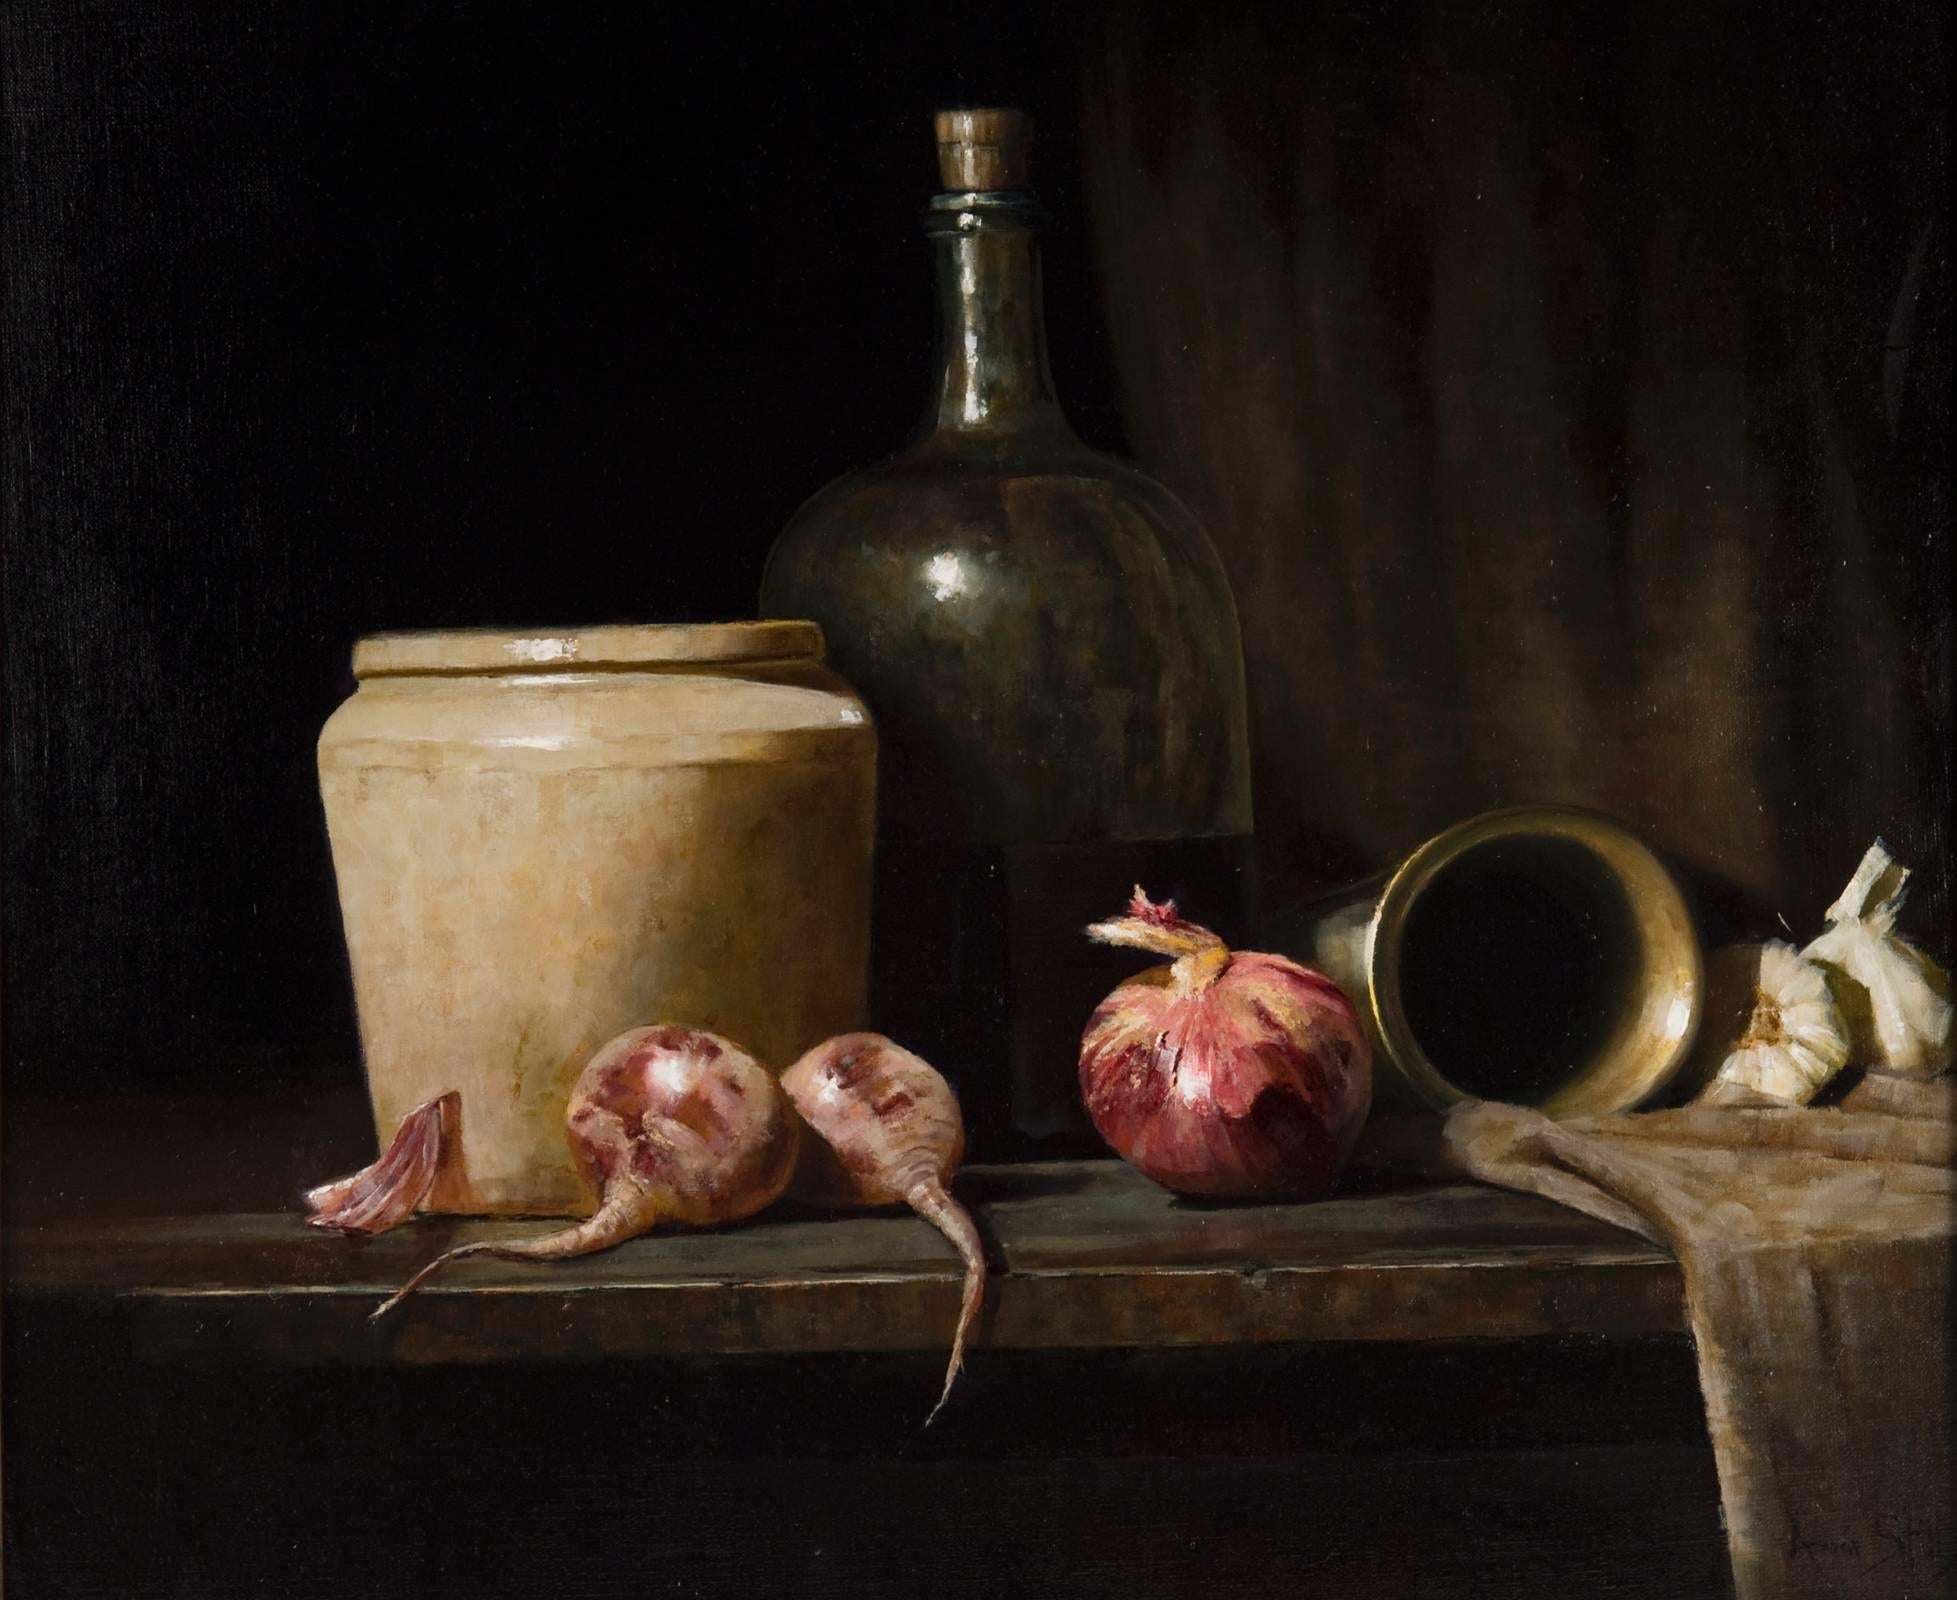 The weight of the ceramic jar and the clarity of the glass bottle; the delicate skin of the red onion and husk of the garlic cloves; the smoother skin of the beets and the coarseness of the fabric draped on the old wooden table, each object evokes a